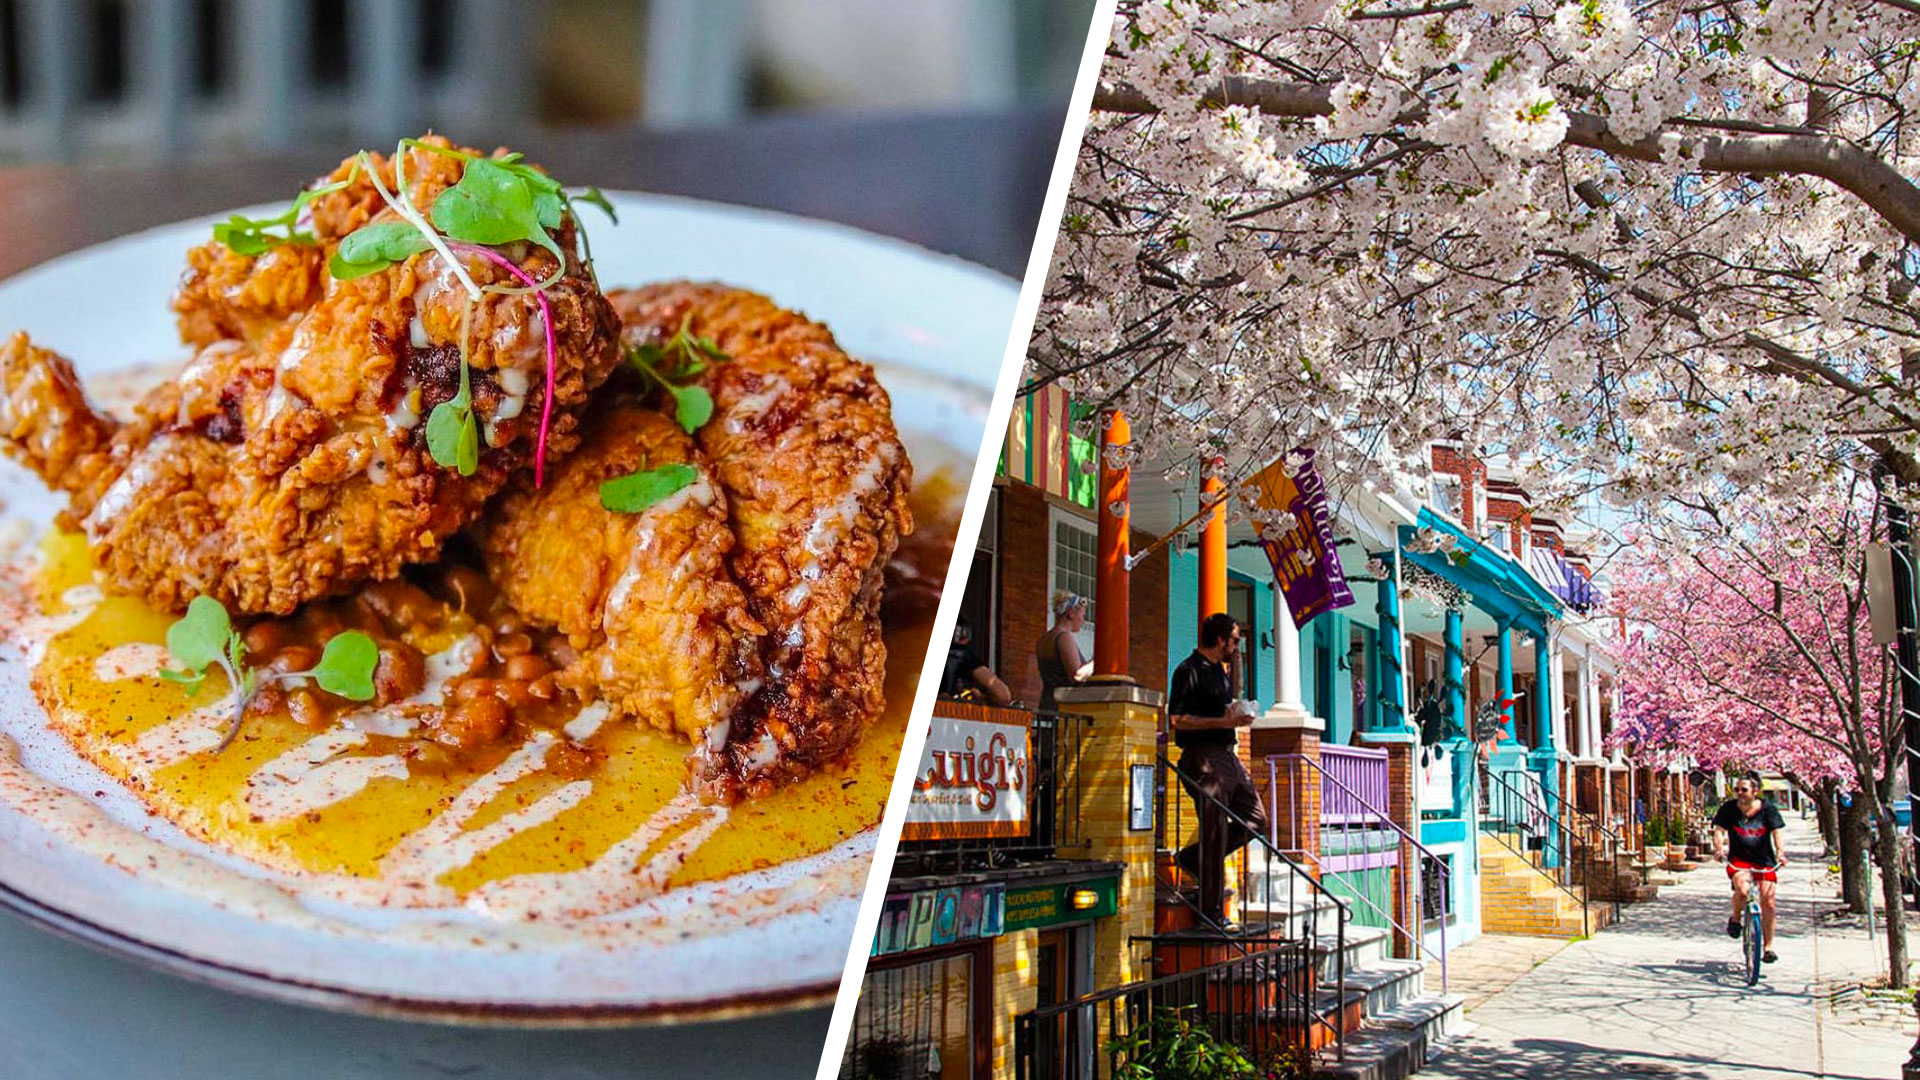 Baltimore Winter Restaurant Week Eat Like a Tourist Pairing - The Food Market and The Avenue in Hampden